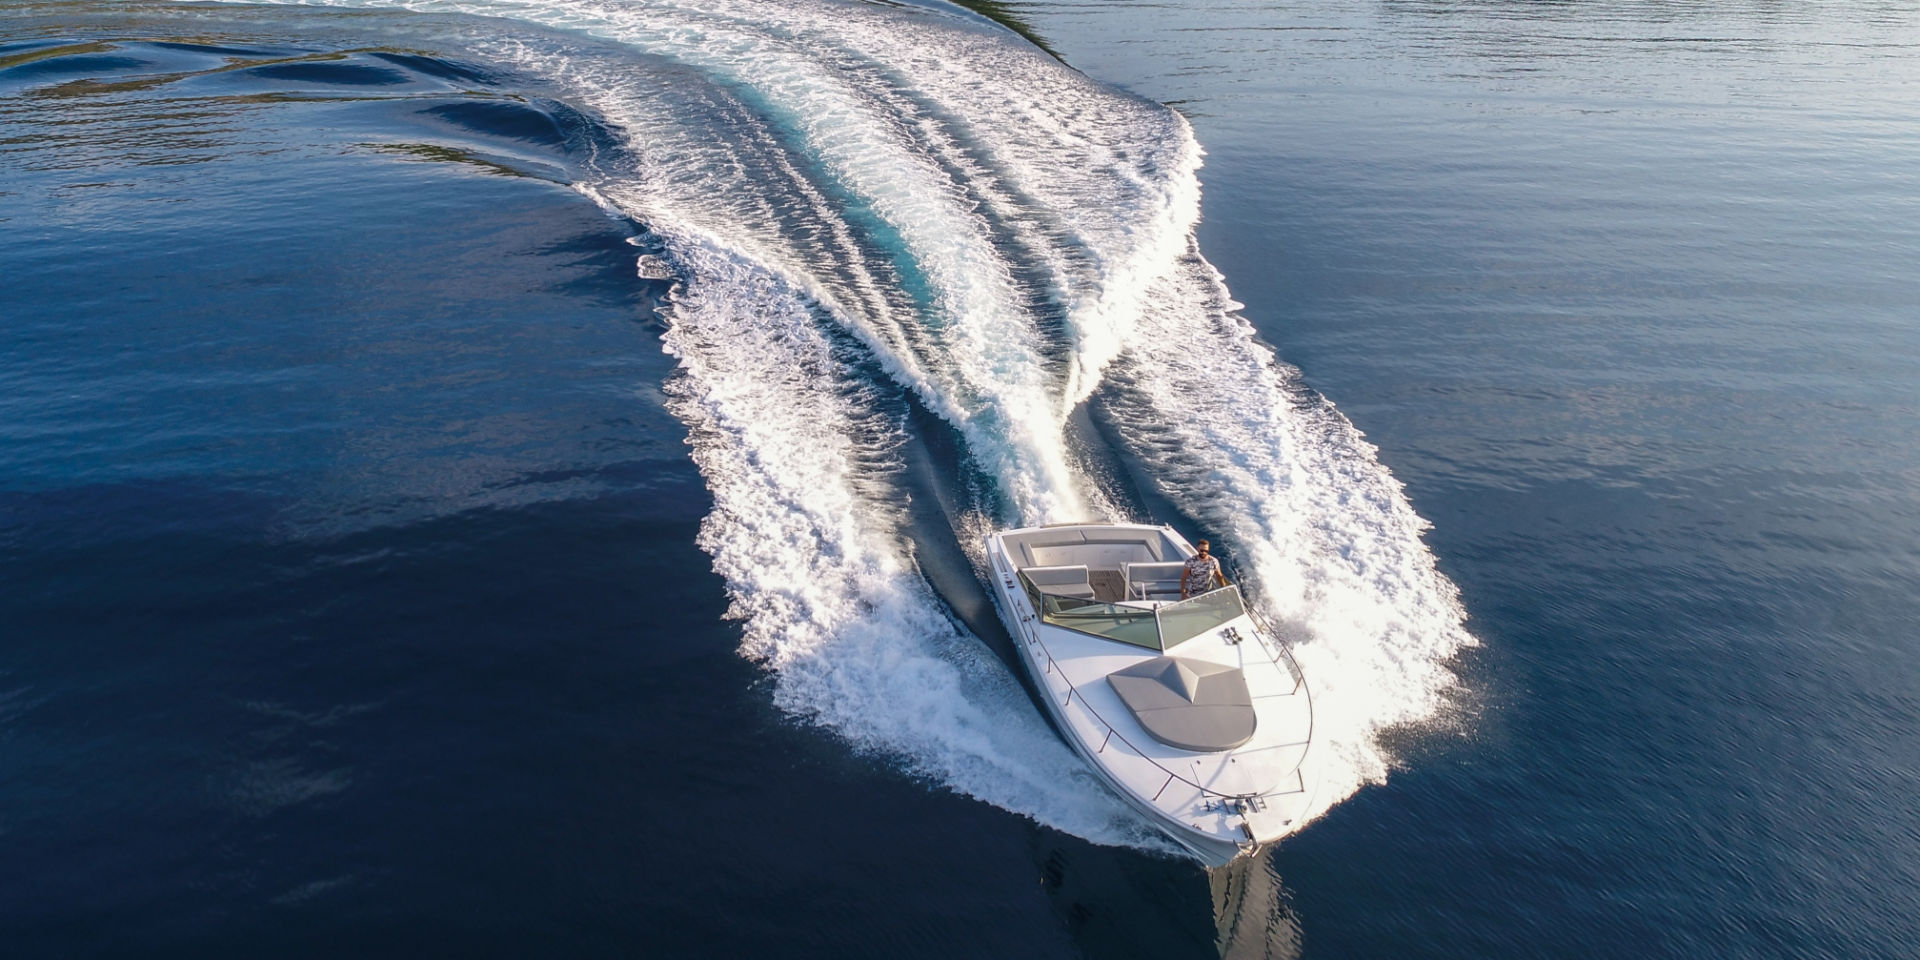 A tornado boat in Hvar with customised silver metallic yacht exterior cushions and a sundeck cushion shaped like a compass rose made by Frey.